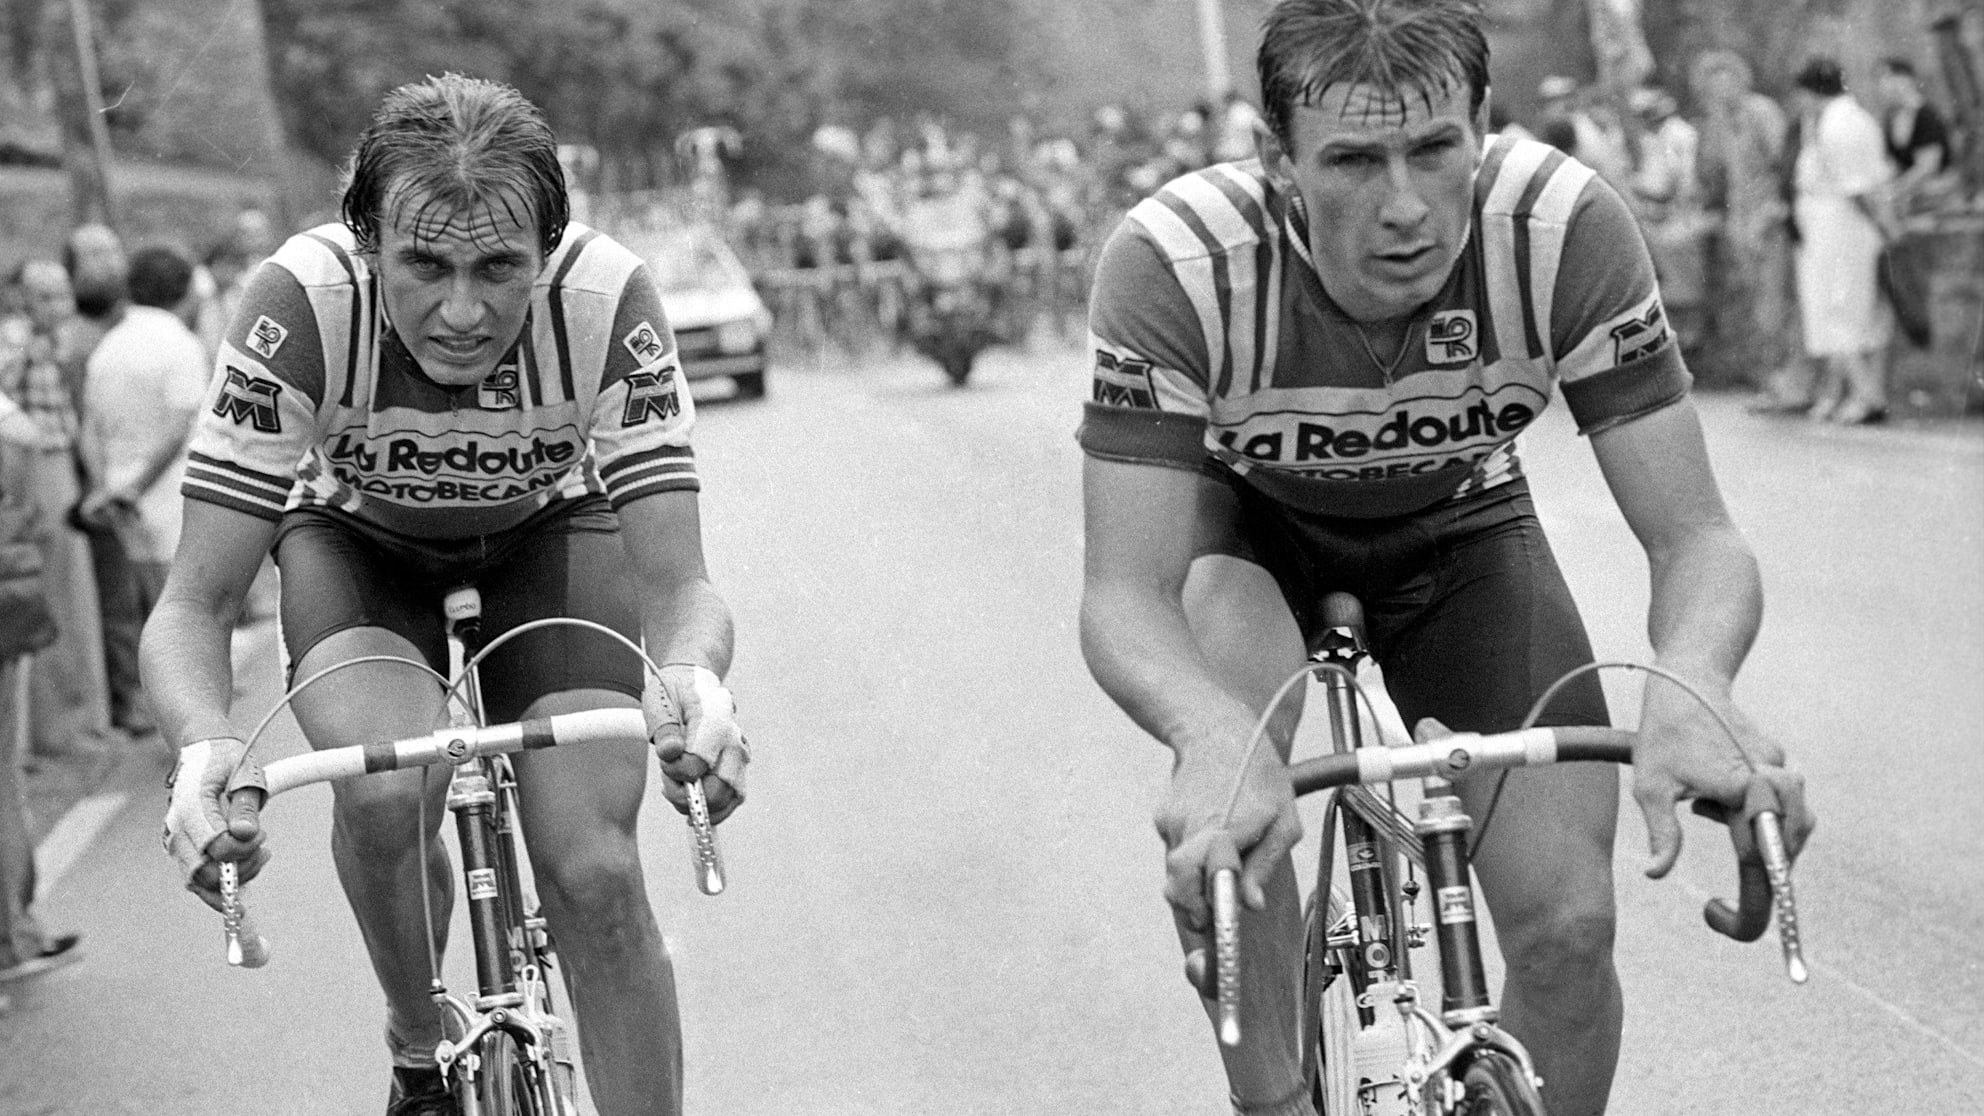 Sorry for the Picture Break Up - A tribute to Paul Sherwen